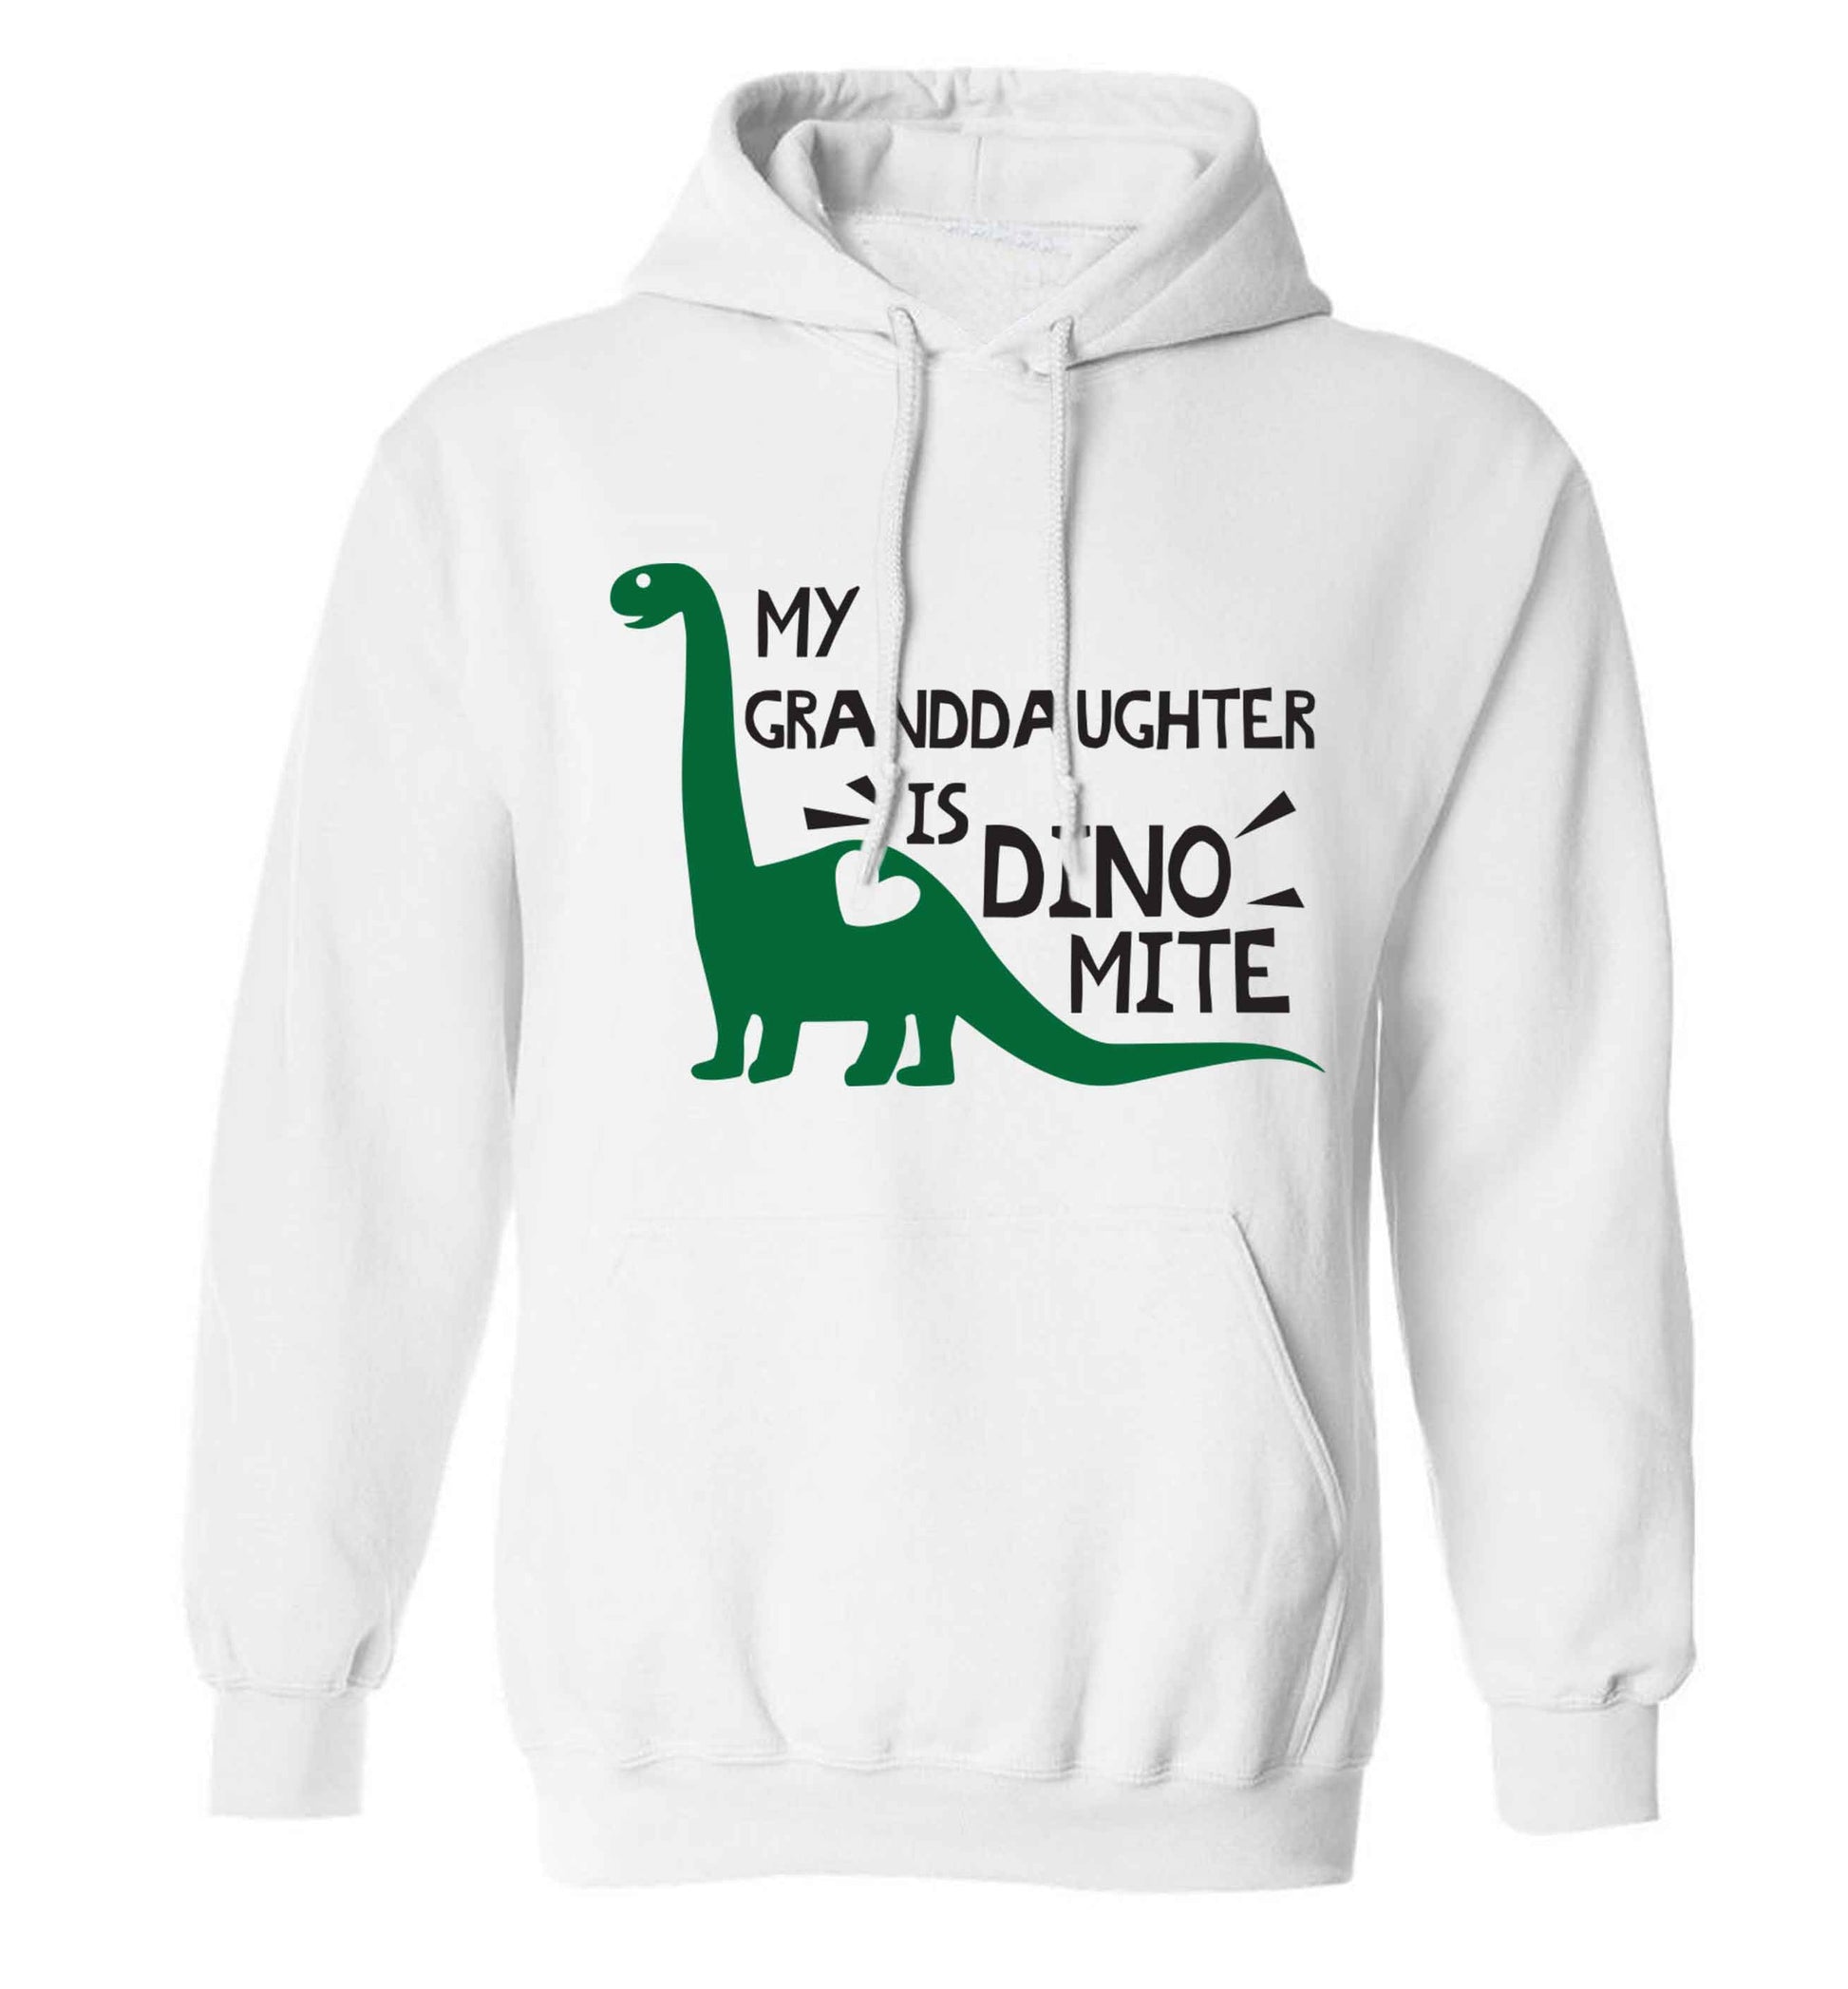 My granddaughter is dinomite! adults unisex white hoodie 2XL